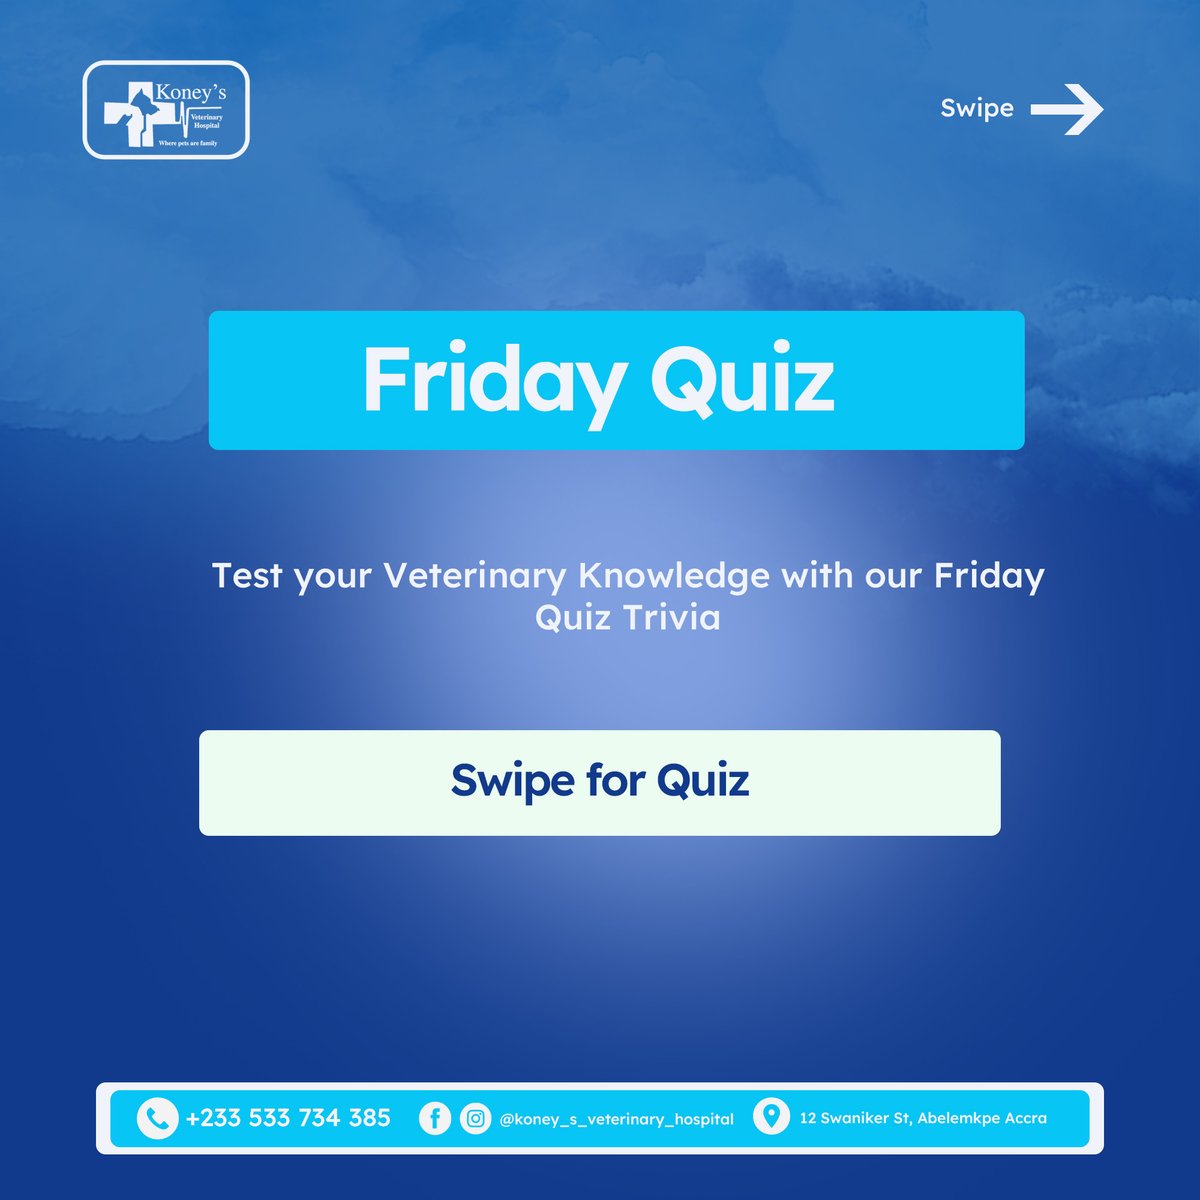 🐾 Test your veterinary knowledge with our fun quiz! Comment below with your answers and tag a friend to challenge them too! 

🐶🐱 #VeterinaryQuiz #TestYourKnowledge #AnimalHealth